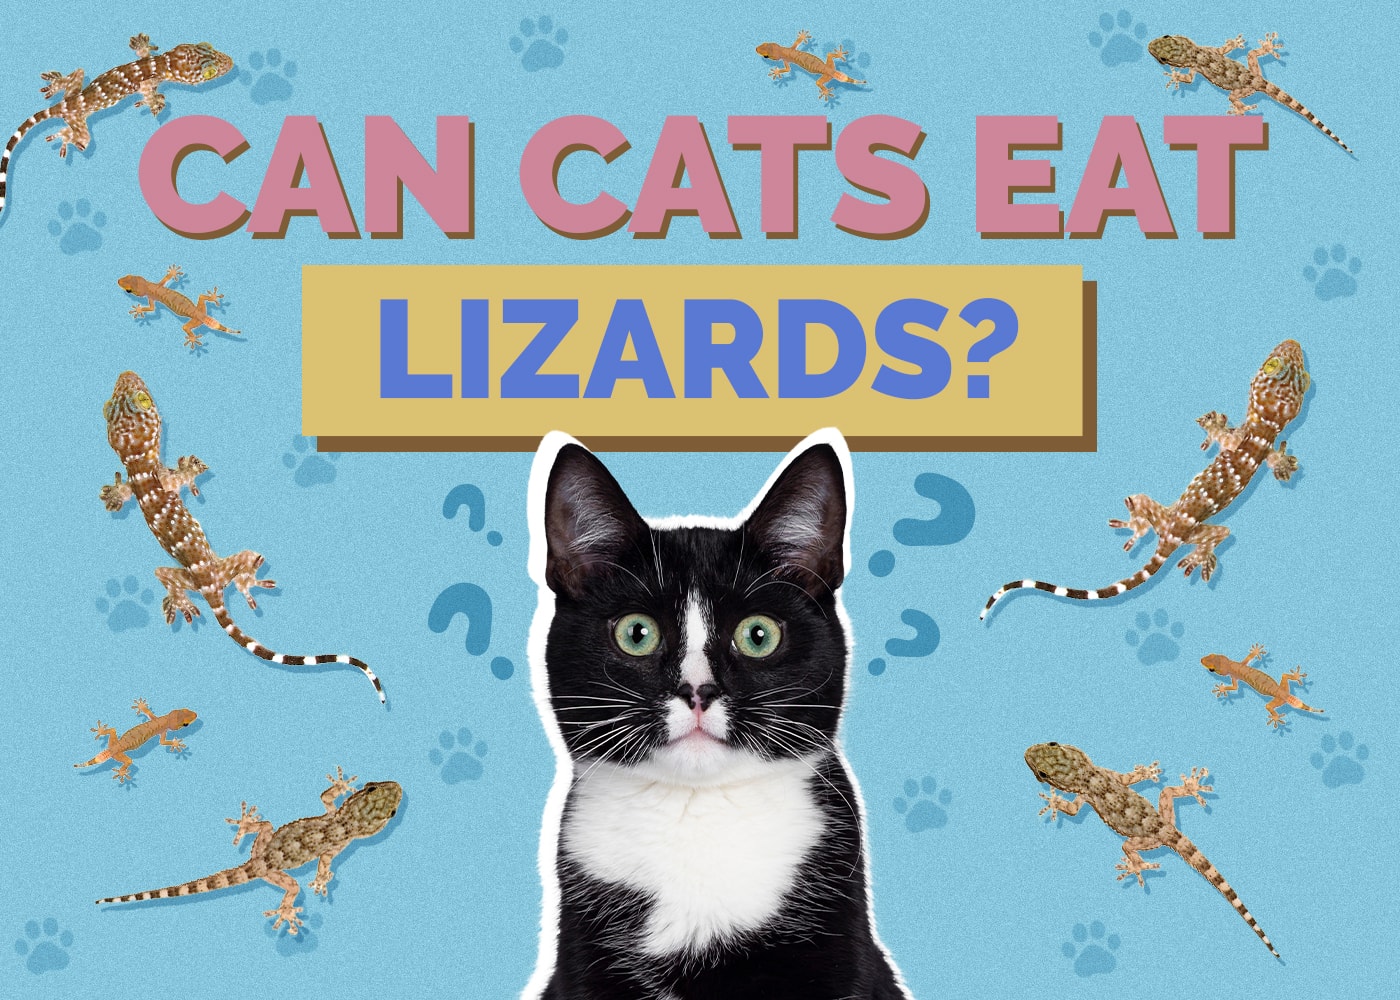 Can Cats Eat lizards